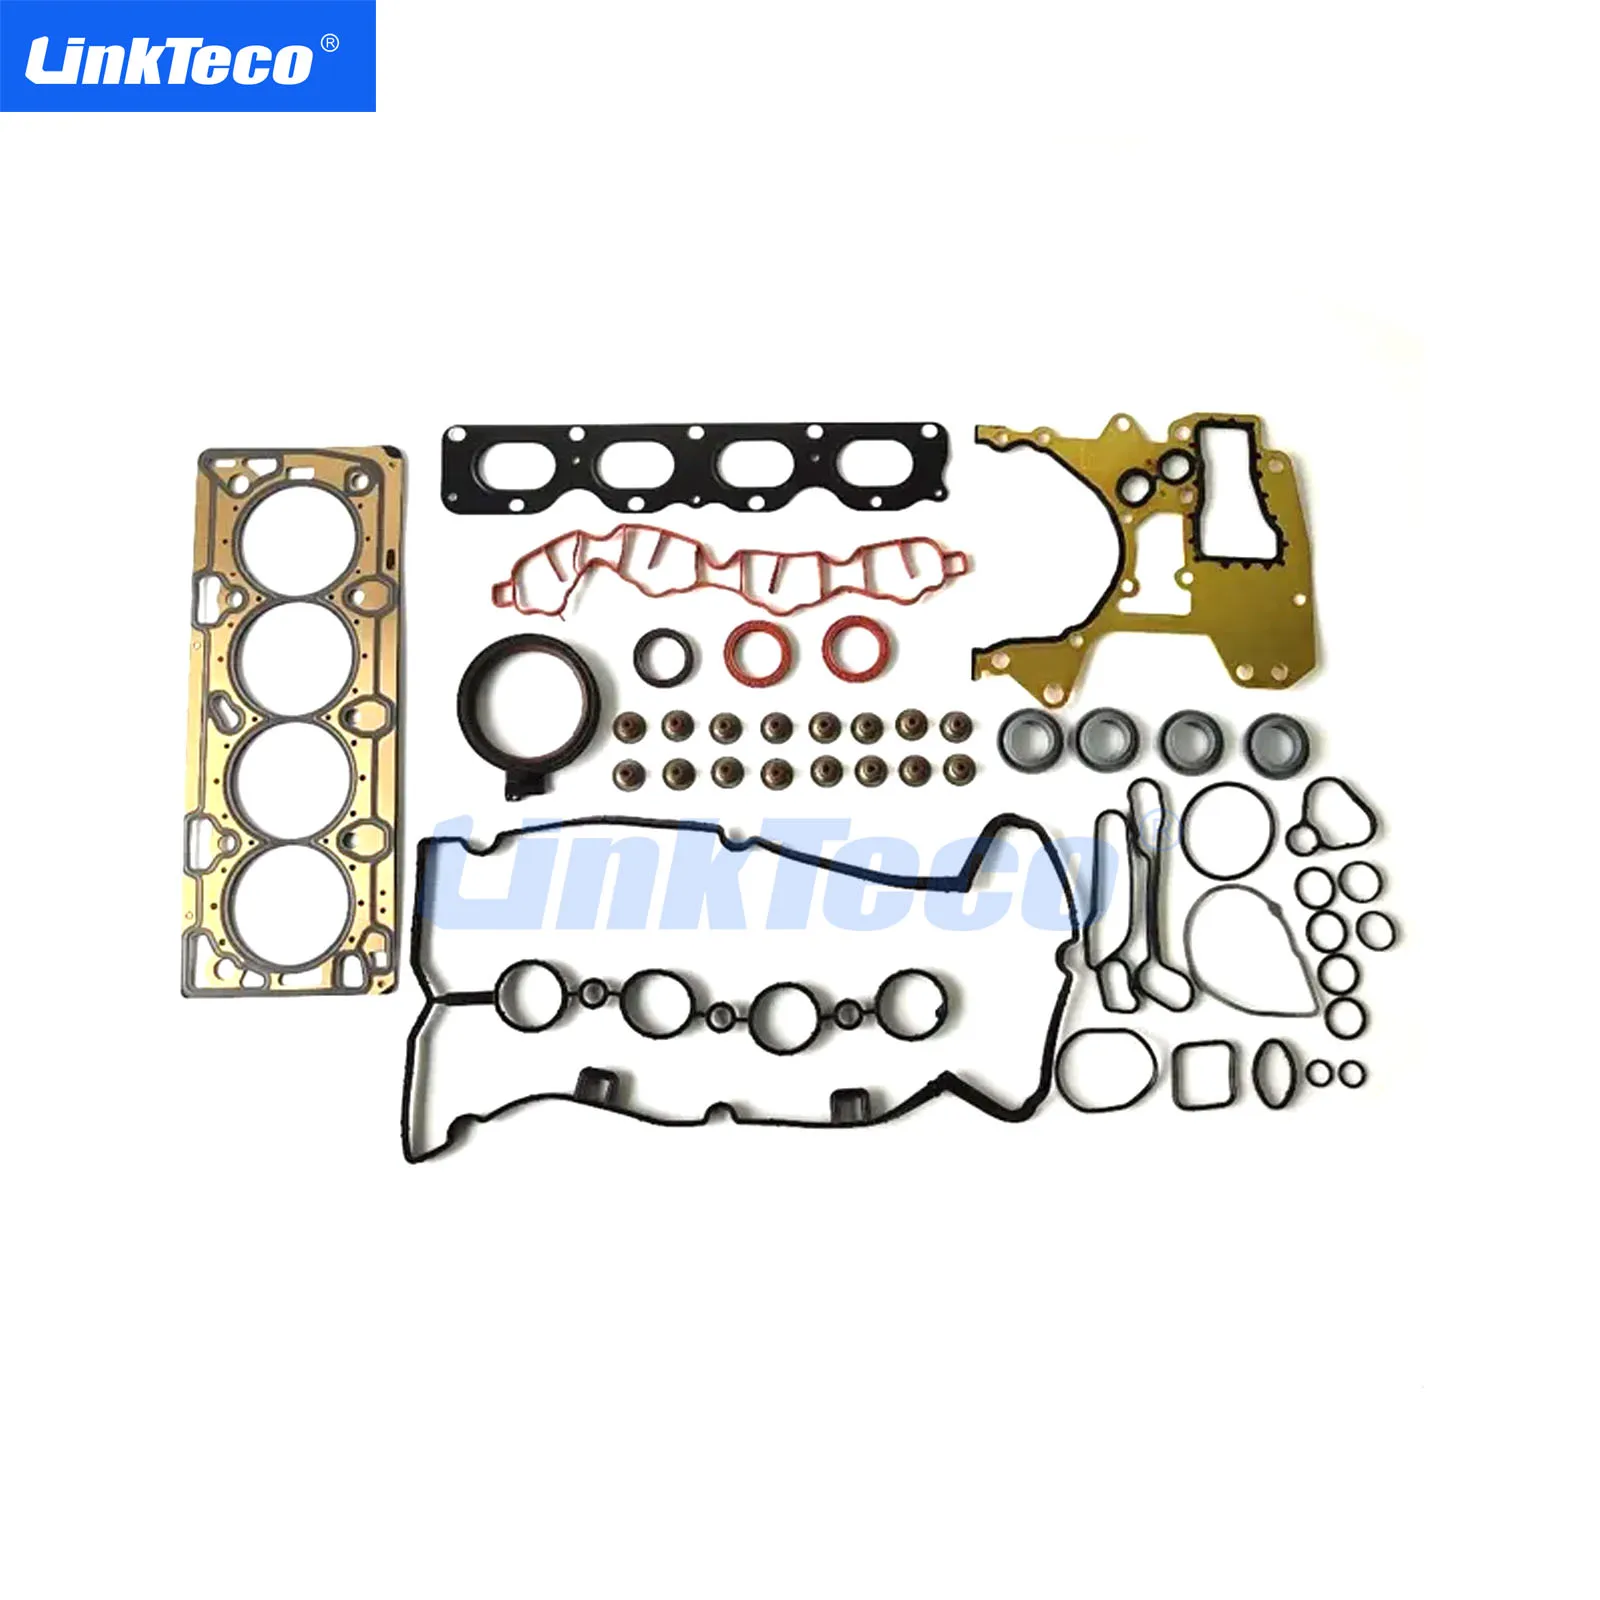 Engine Cylinder Head Gasket Set Full Gasket Overhaul Kit For GMC Chevrolet Cruze Aveo Trax Opel Astra 1.6L A16XER 55568528